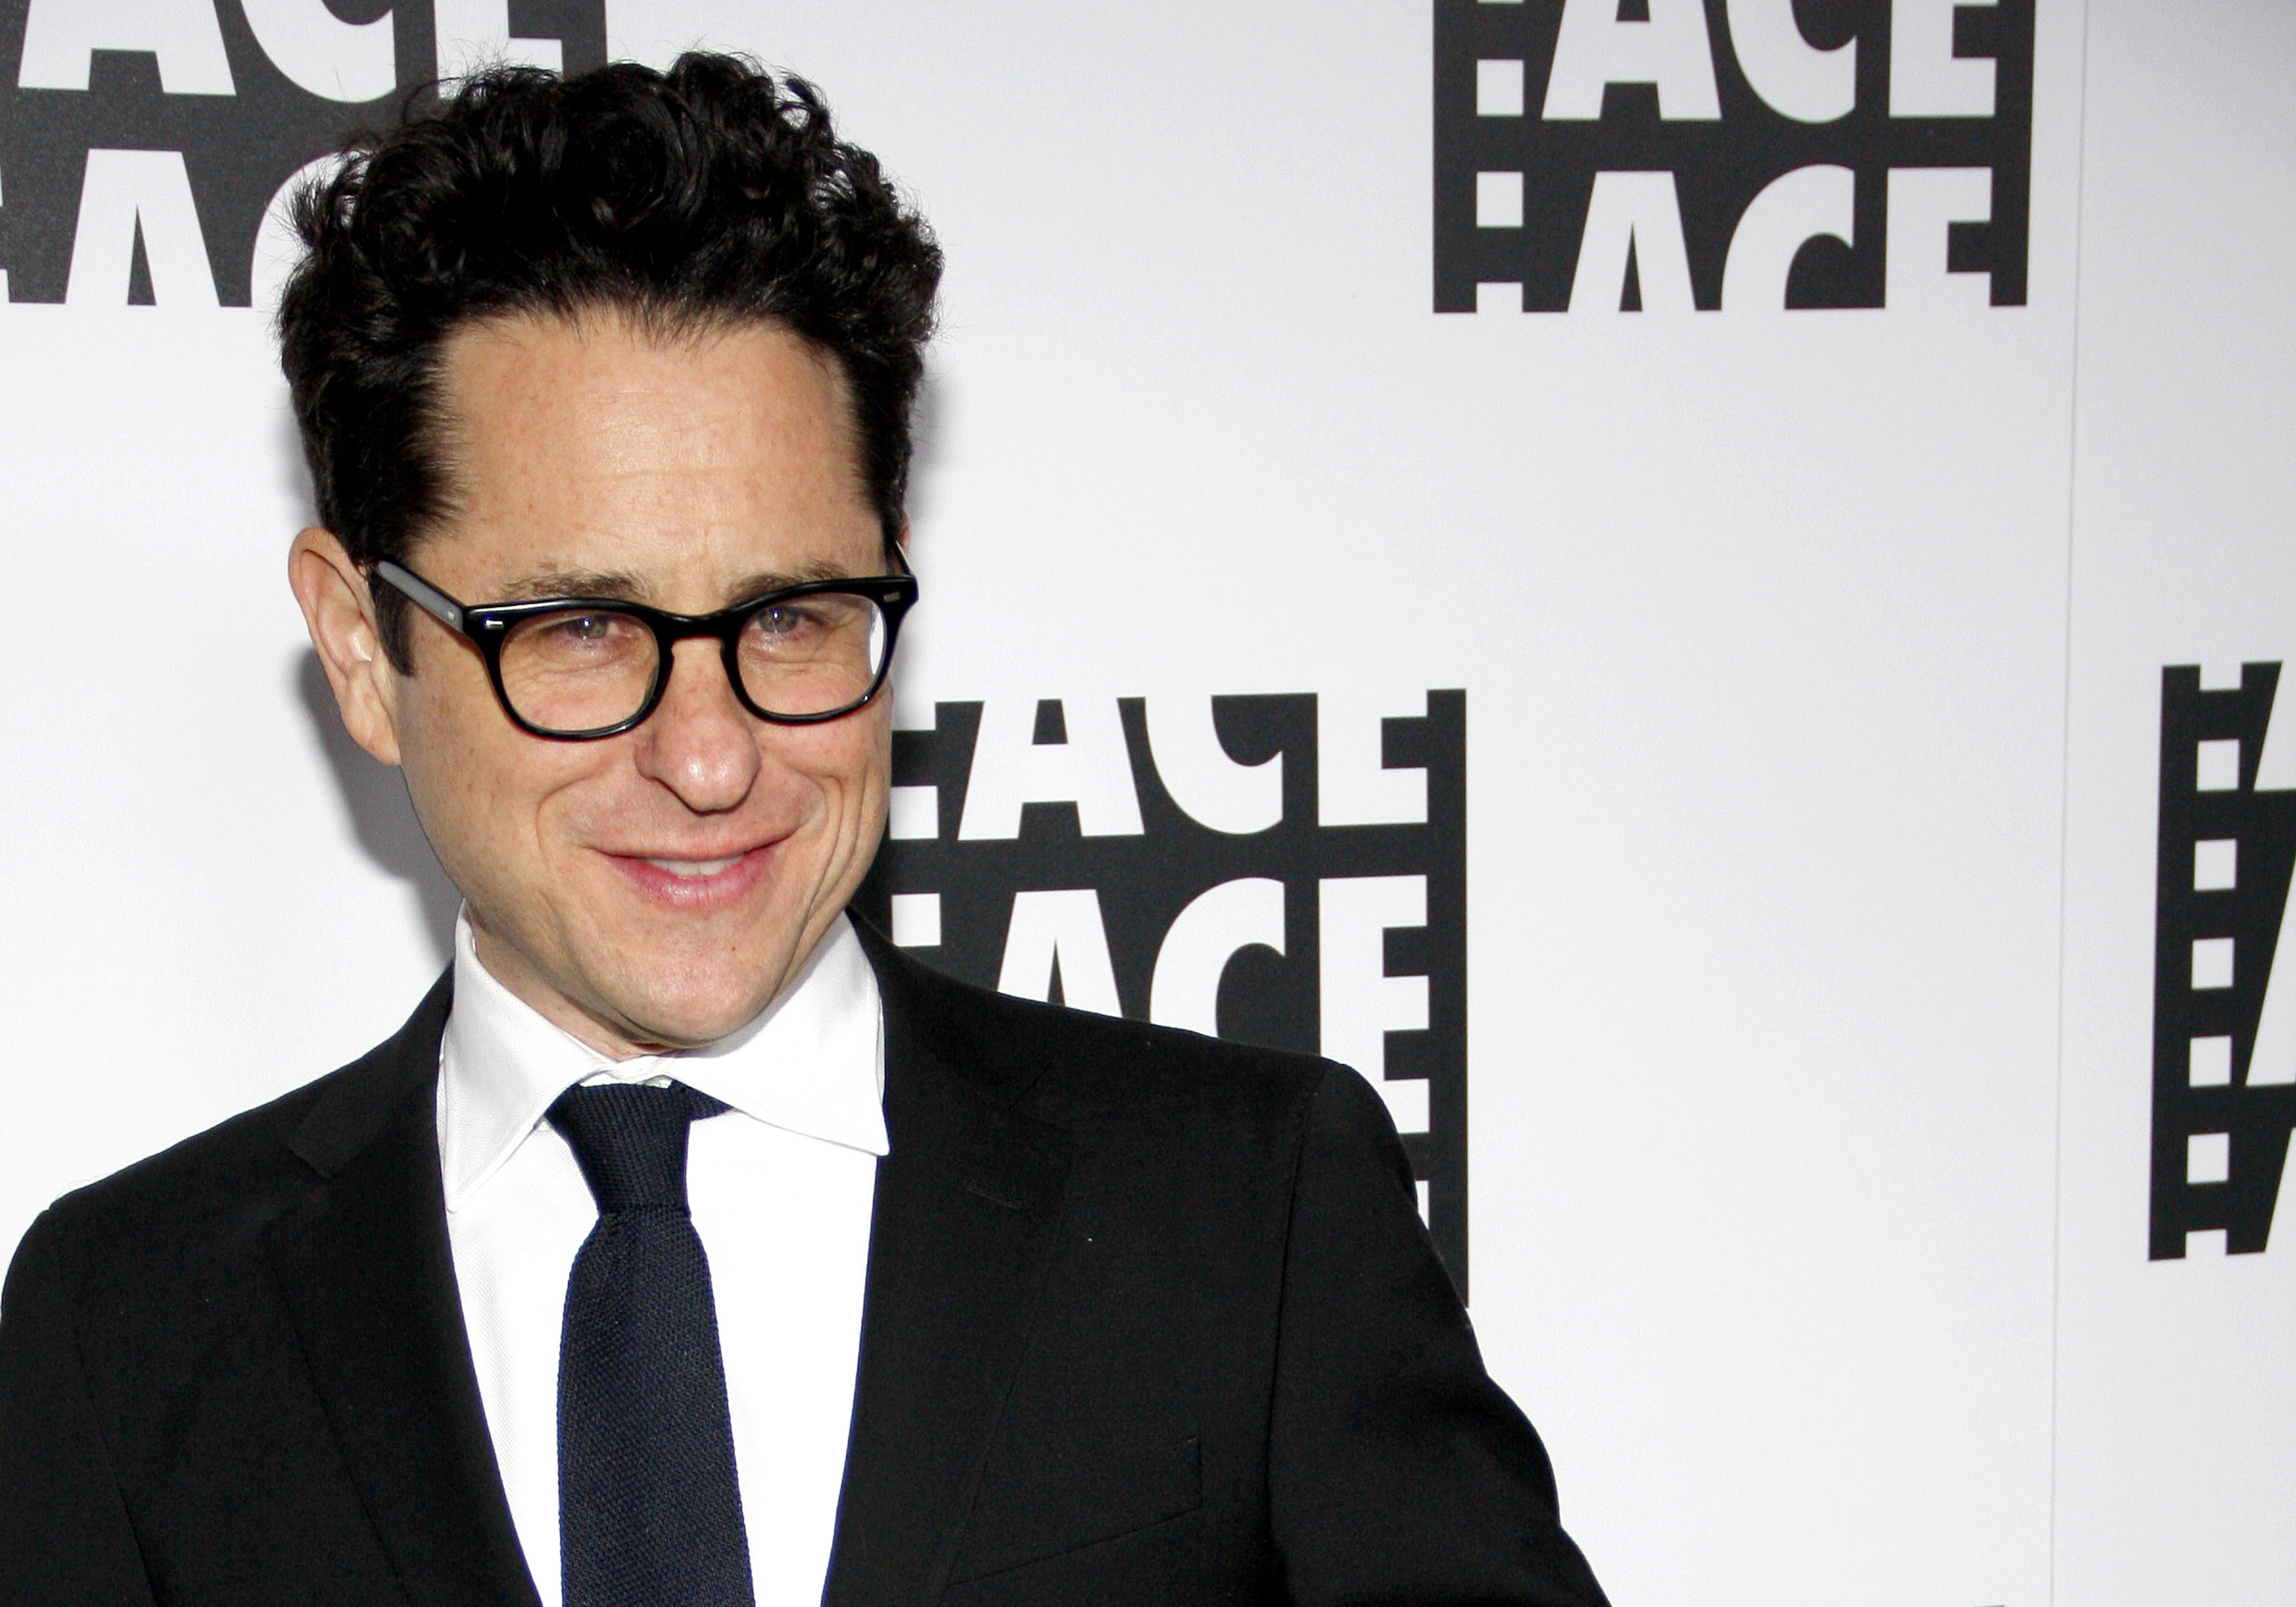 J.J. Abrams at the 66th Annual ACE Eddie Awards